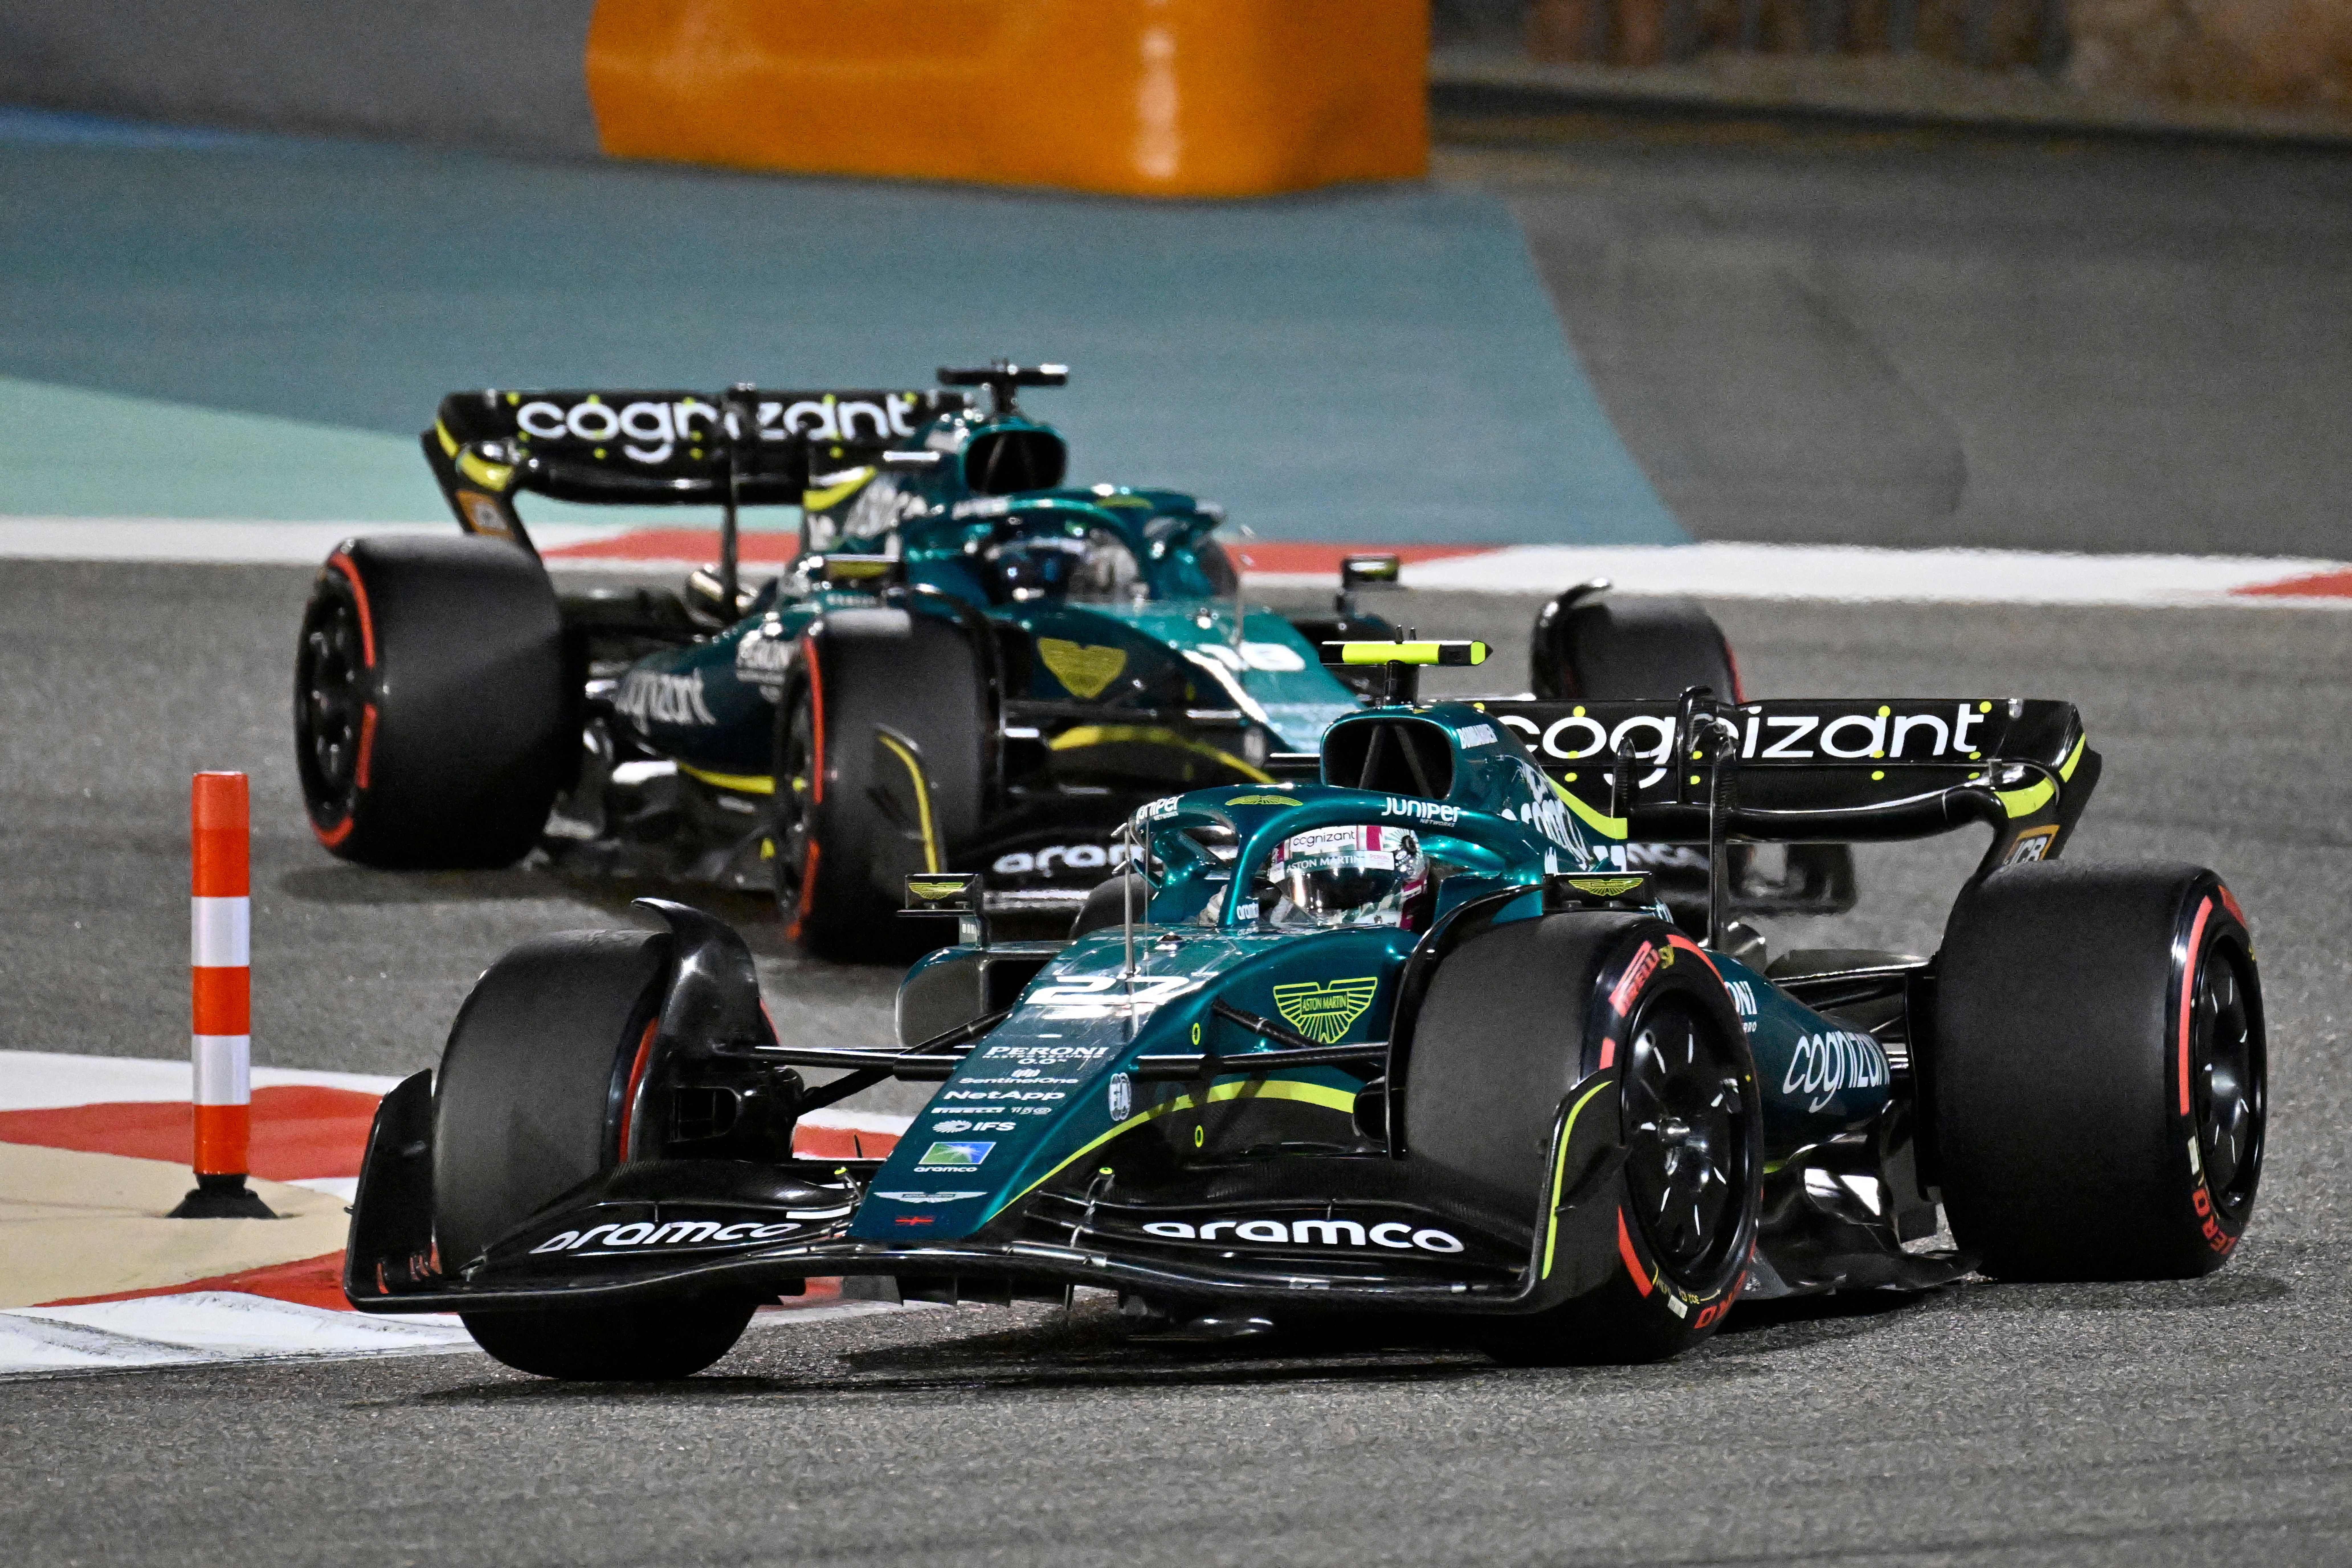 Aston Martin had one of the slowest cars in Bahrain.